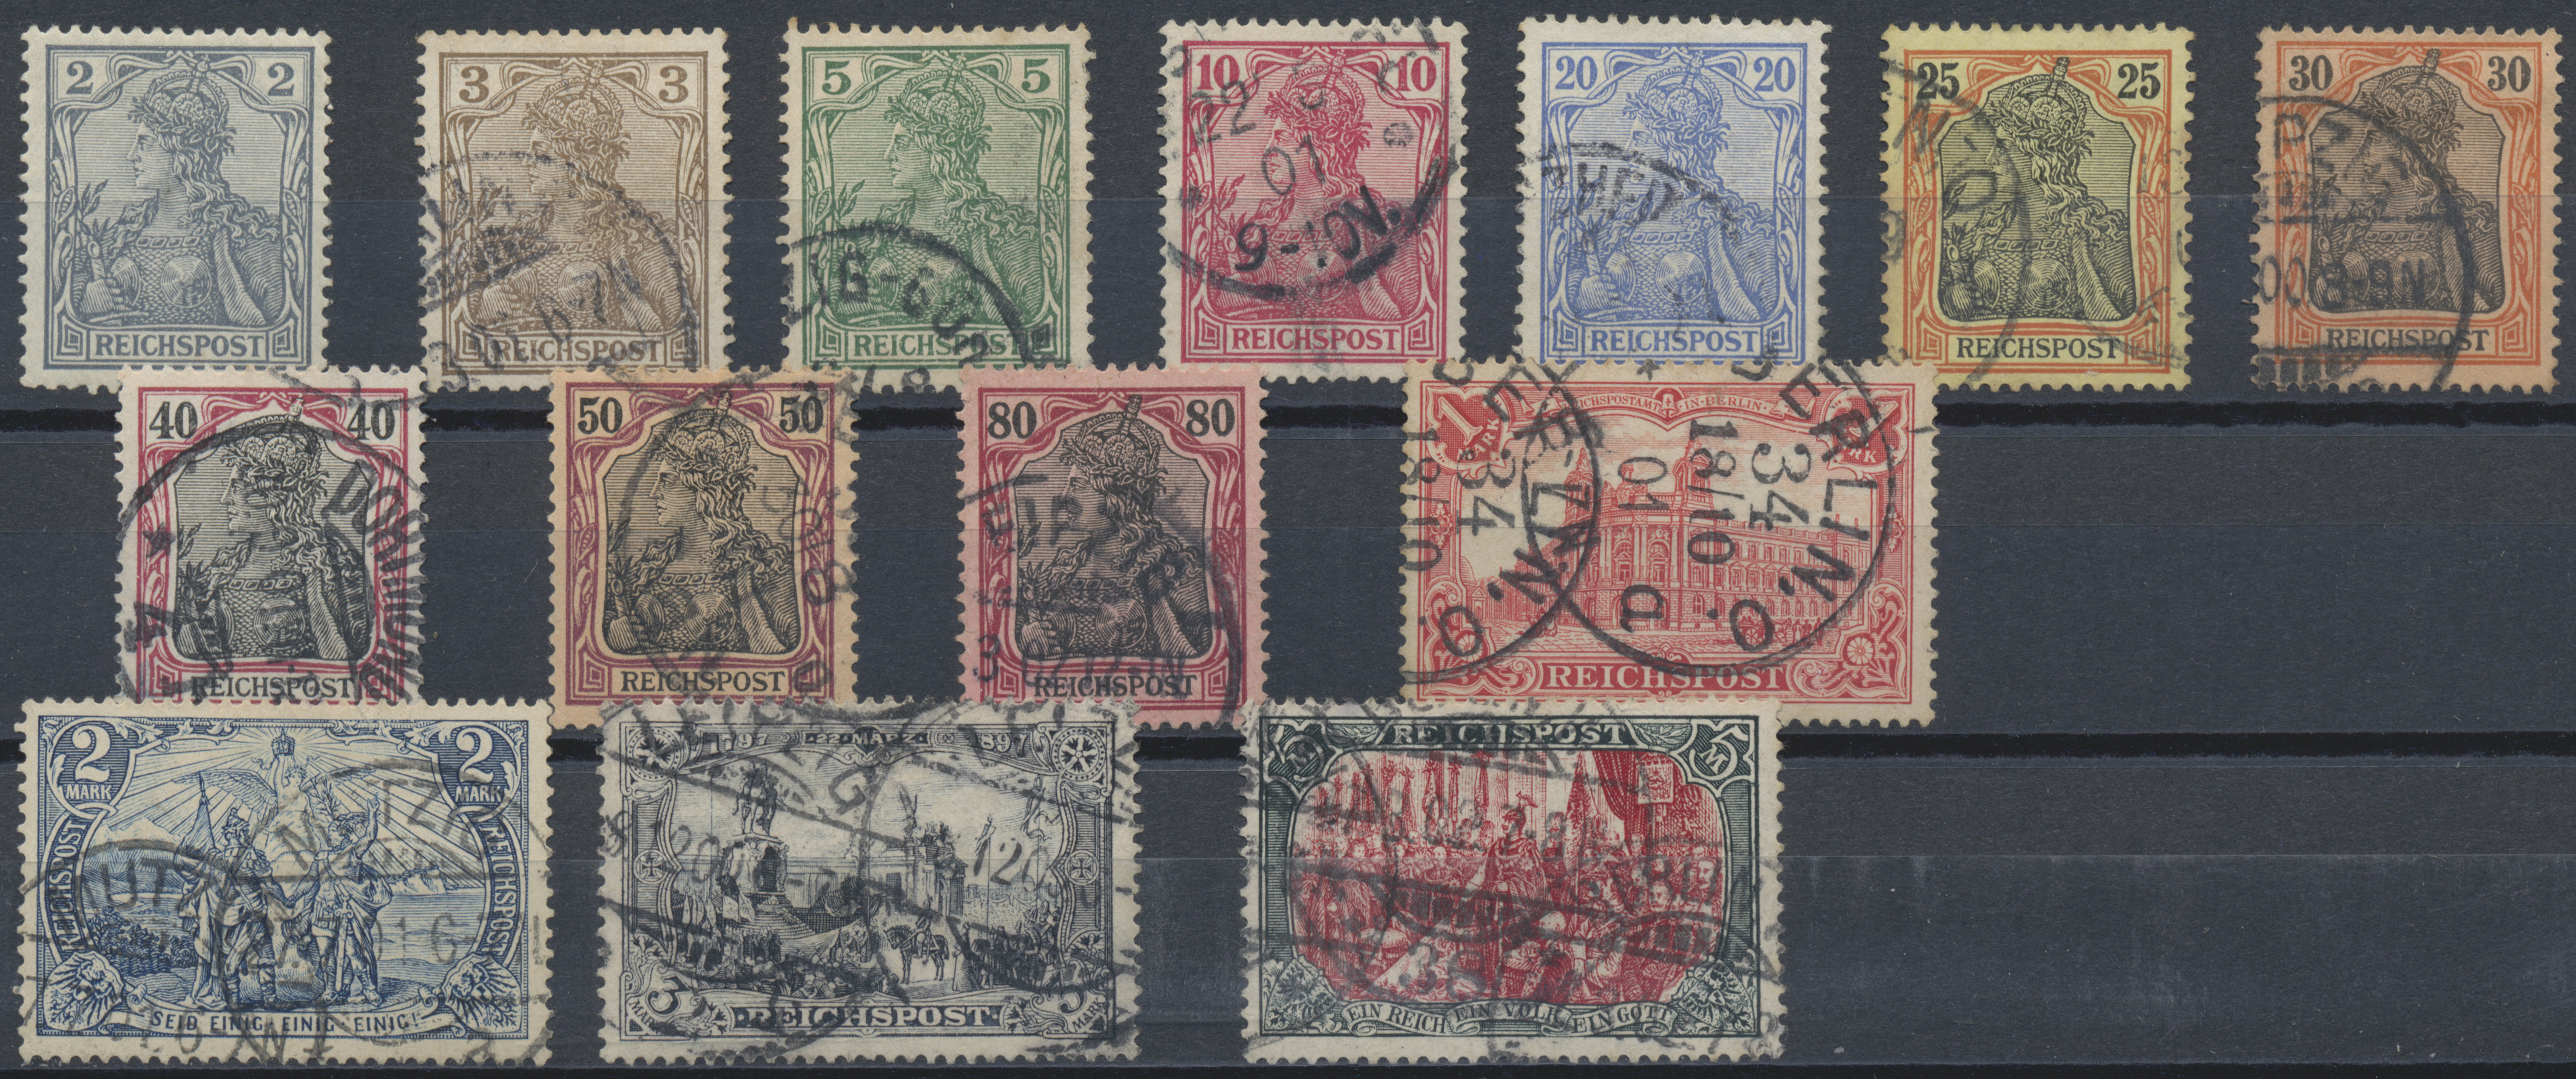 Lot 36408 - Deutsches Reich  -  Auktionshaus Christoph Gärtner GmbH & Co. KG Sale #44 Collections Germany